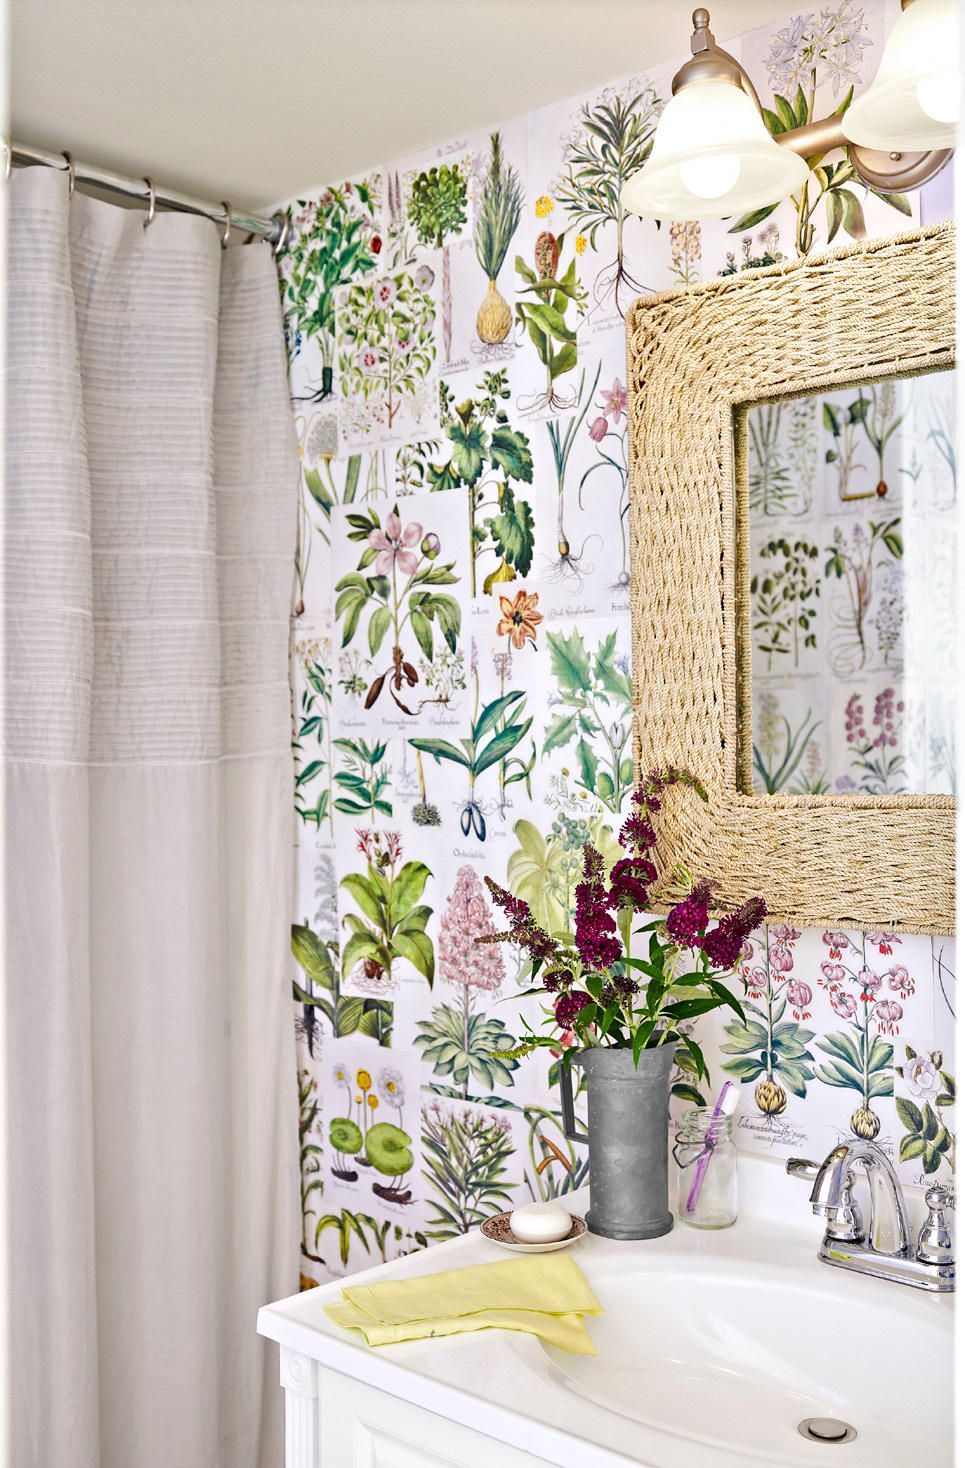 55 Bathroom Decorating Ideas Pictures, Beautiful Bathrooms With Shower Curtains